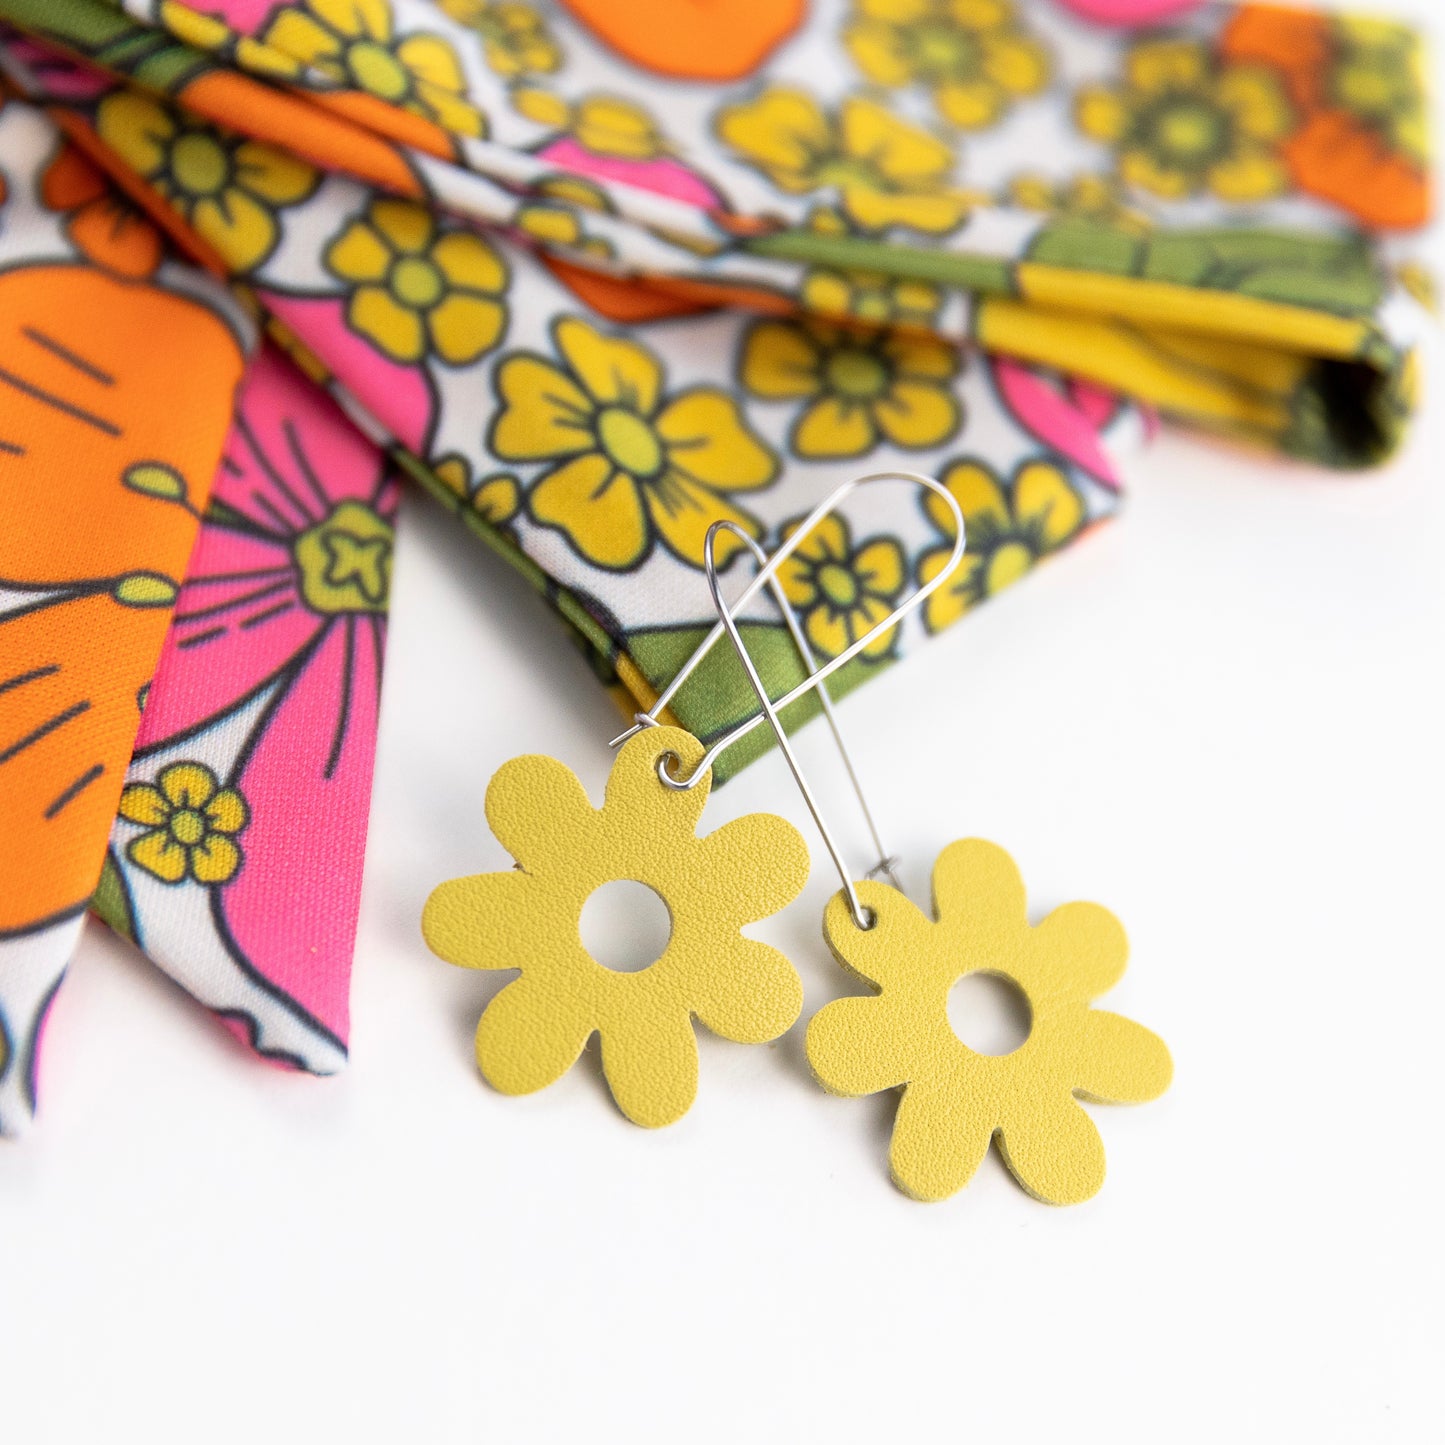 THE BEST EARRINGS/HEADBAND in Nostalgic Floral + Yellow Flower Drops/ Statement Accessories